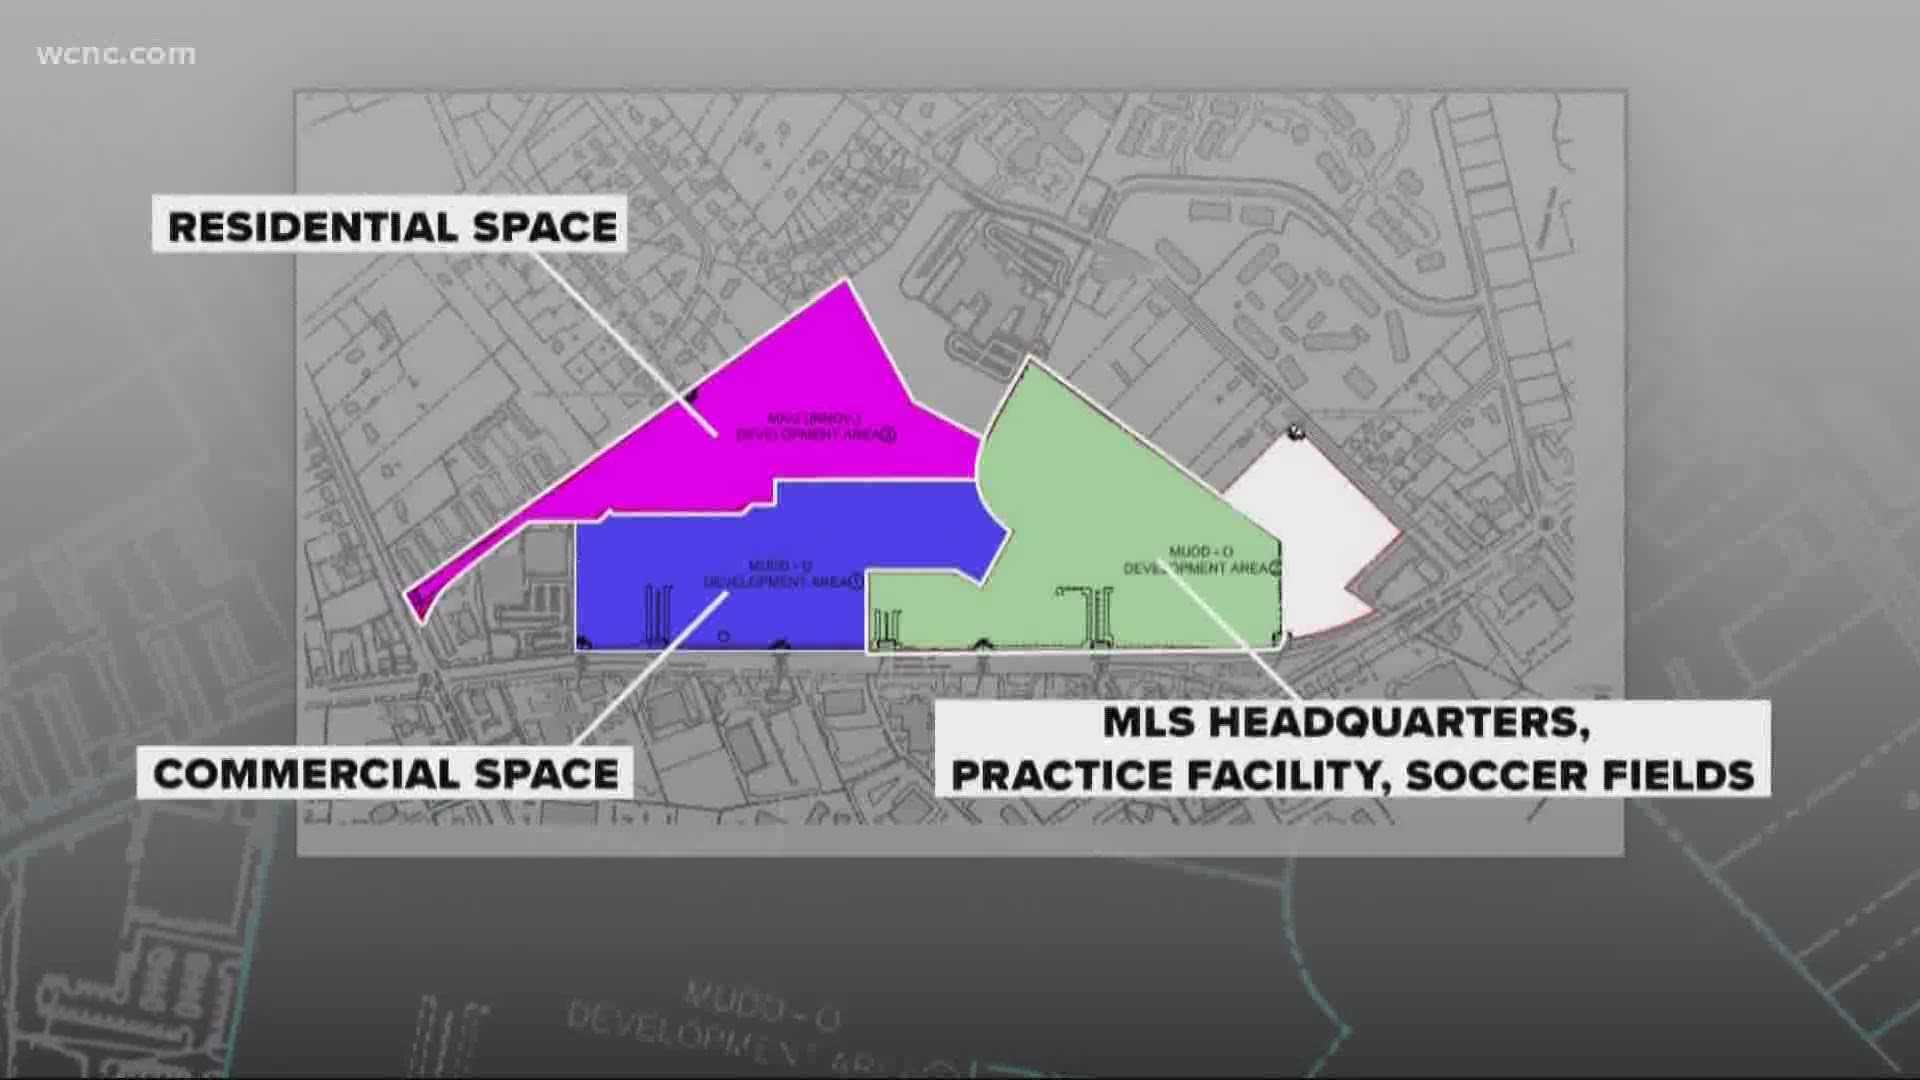 Charlotte City Council is set to vote tonight on rezoning the former Eastland Mall site. The proposal would put MLS facilities and housing on the former mall site.